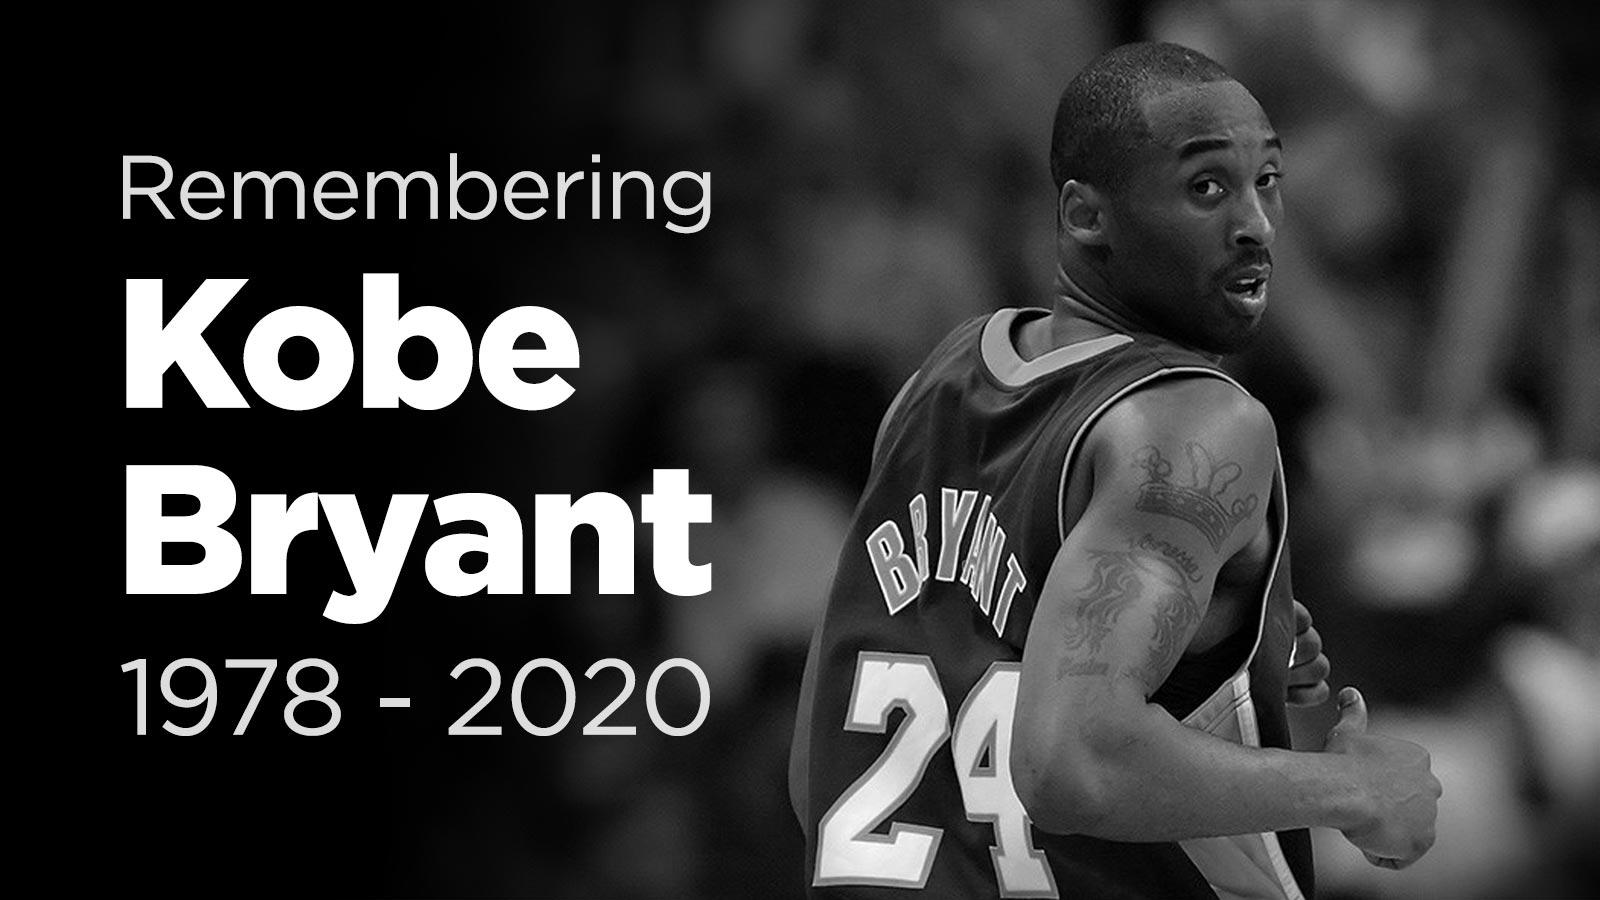 Follow LIVE coverage of Kobe Bryant's death on SiriusXM's